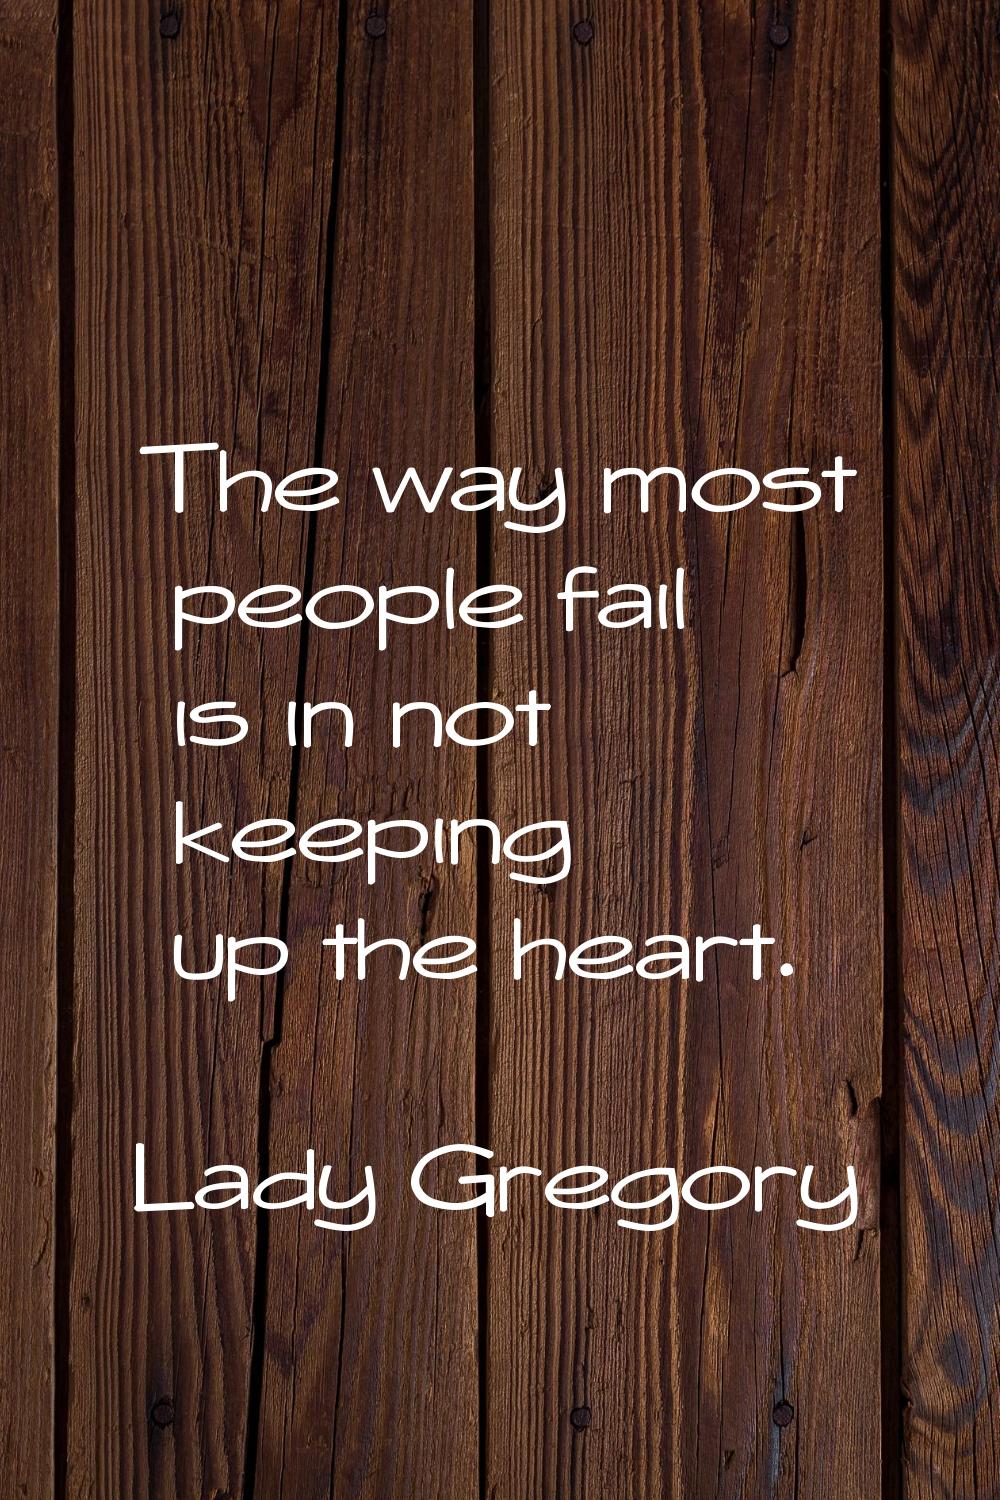 The way most people fail is in not keeping up the heart.